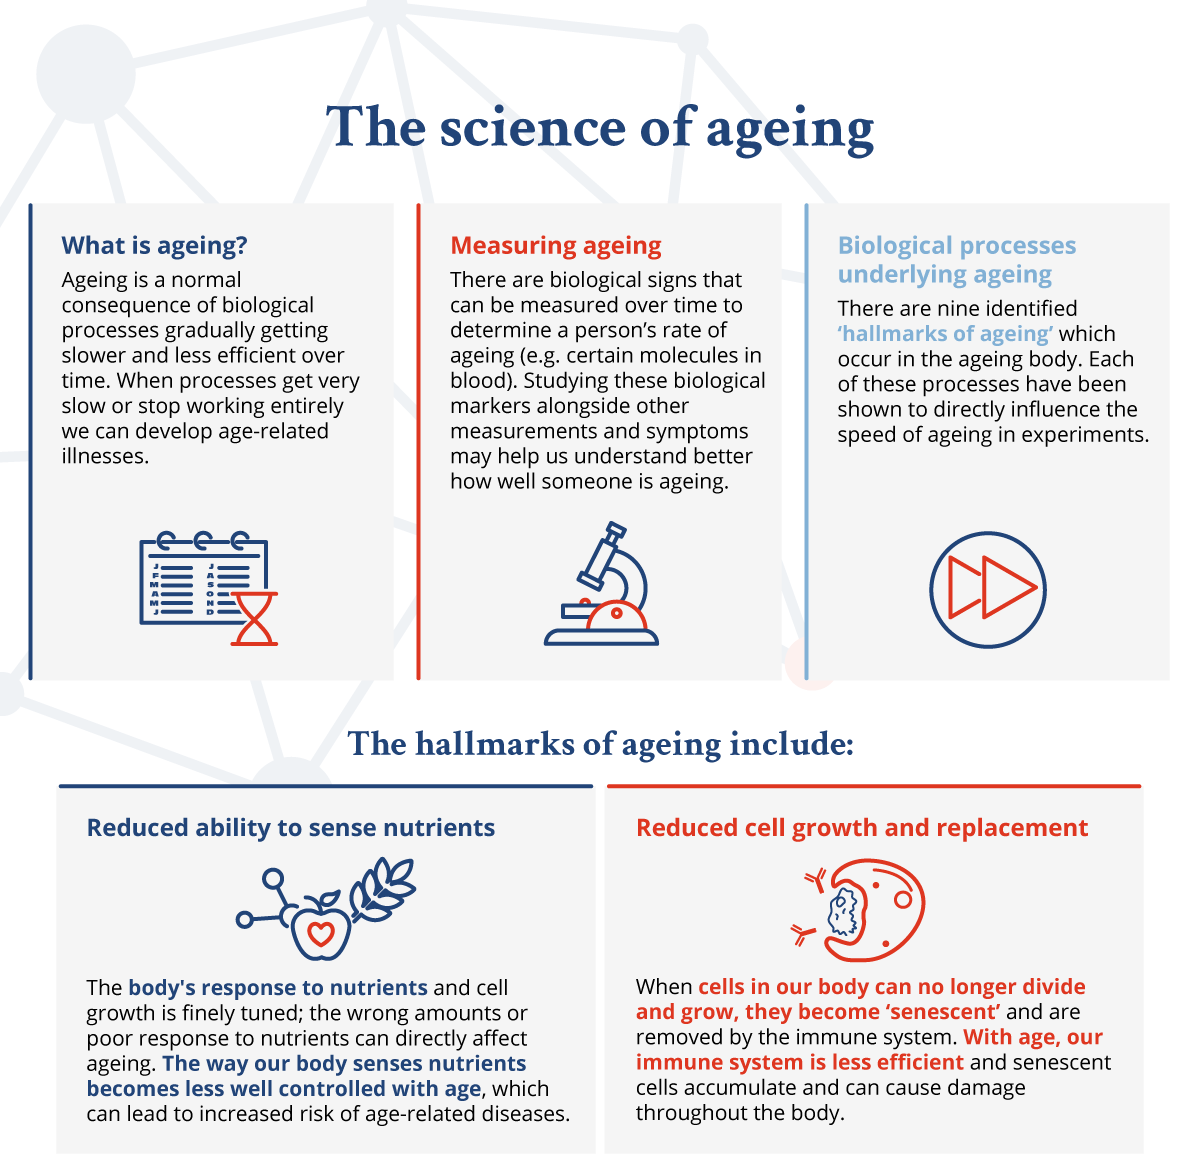 The science of ageing